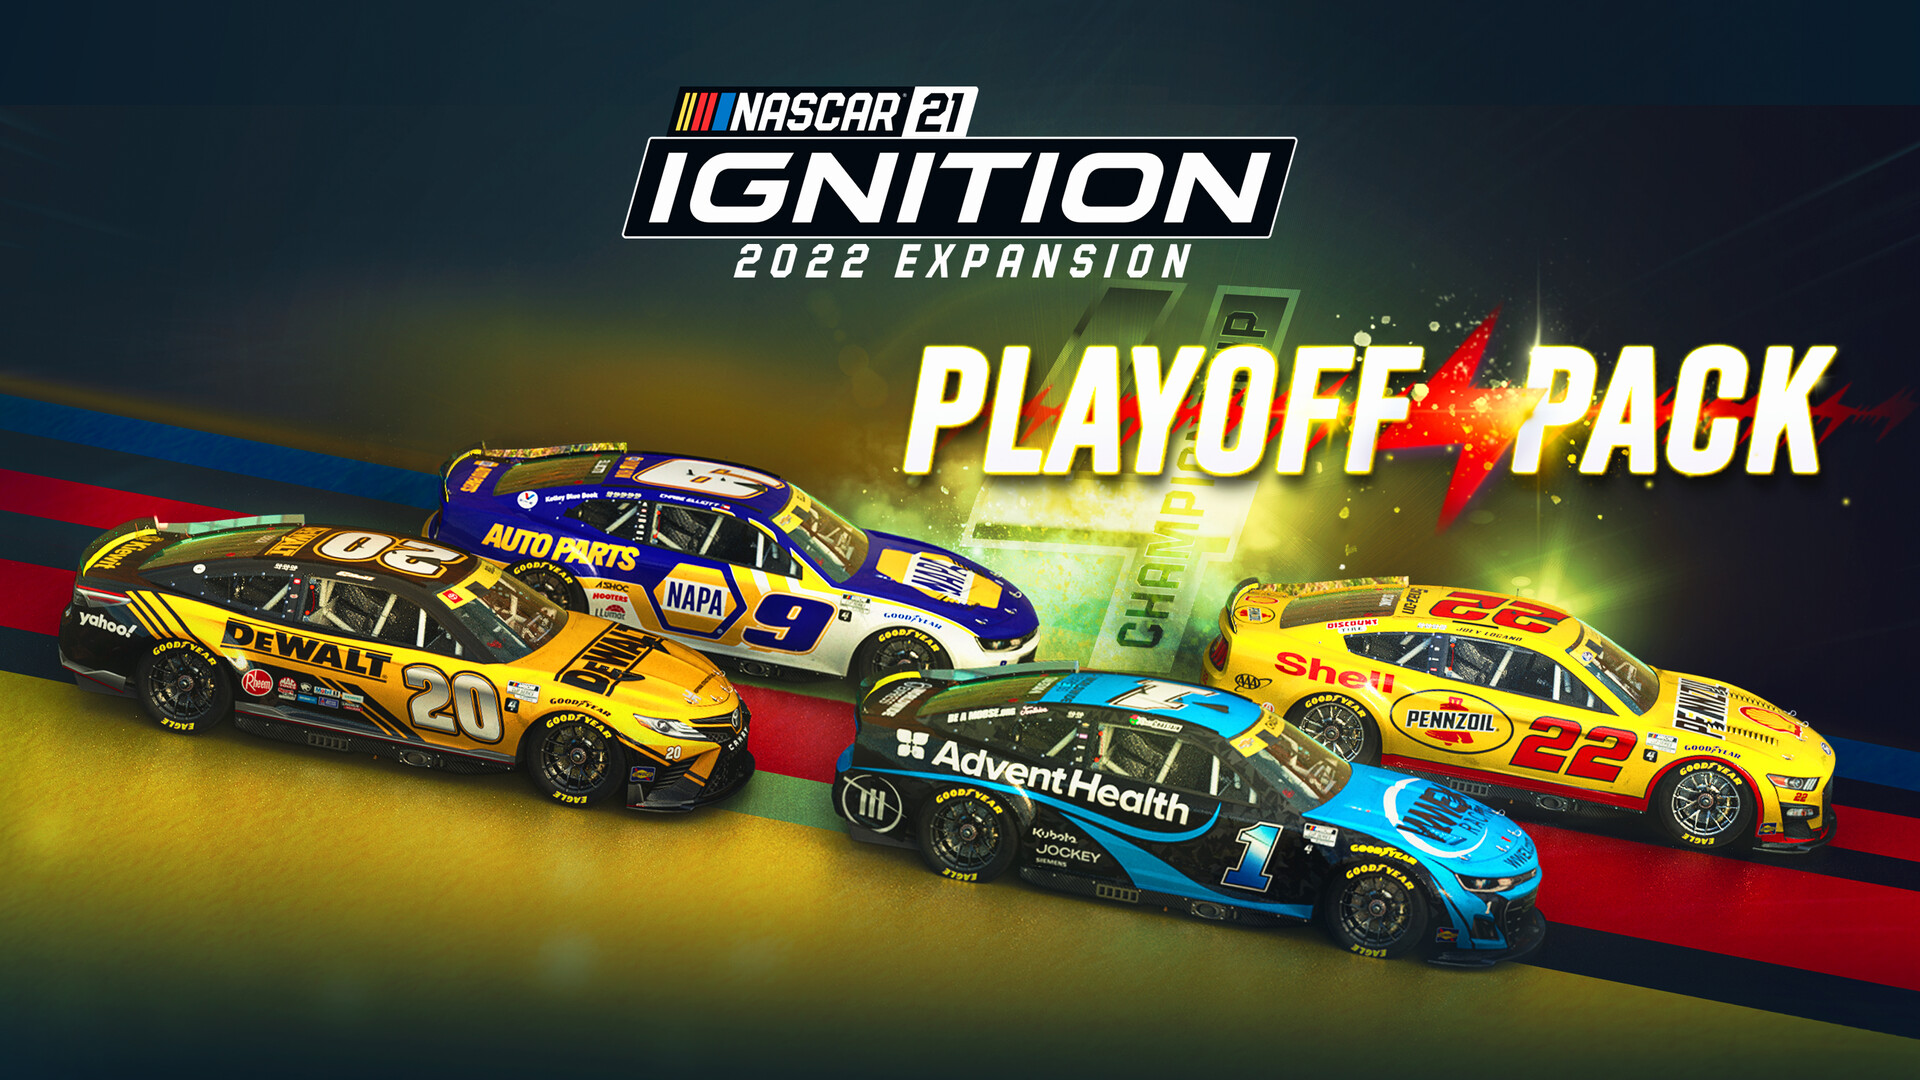 Nascar 21 Ignition 2022 Playoff Pack On Steam 0051